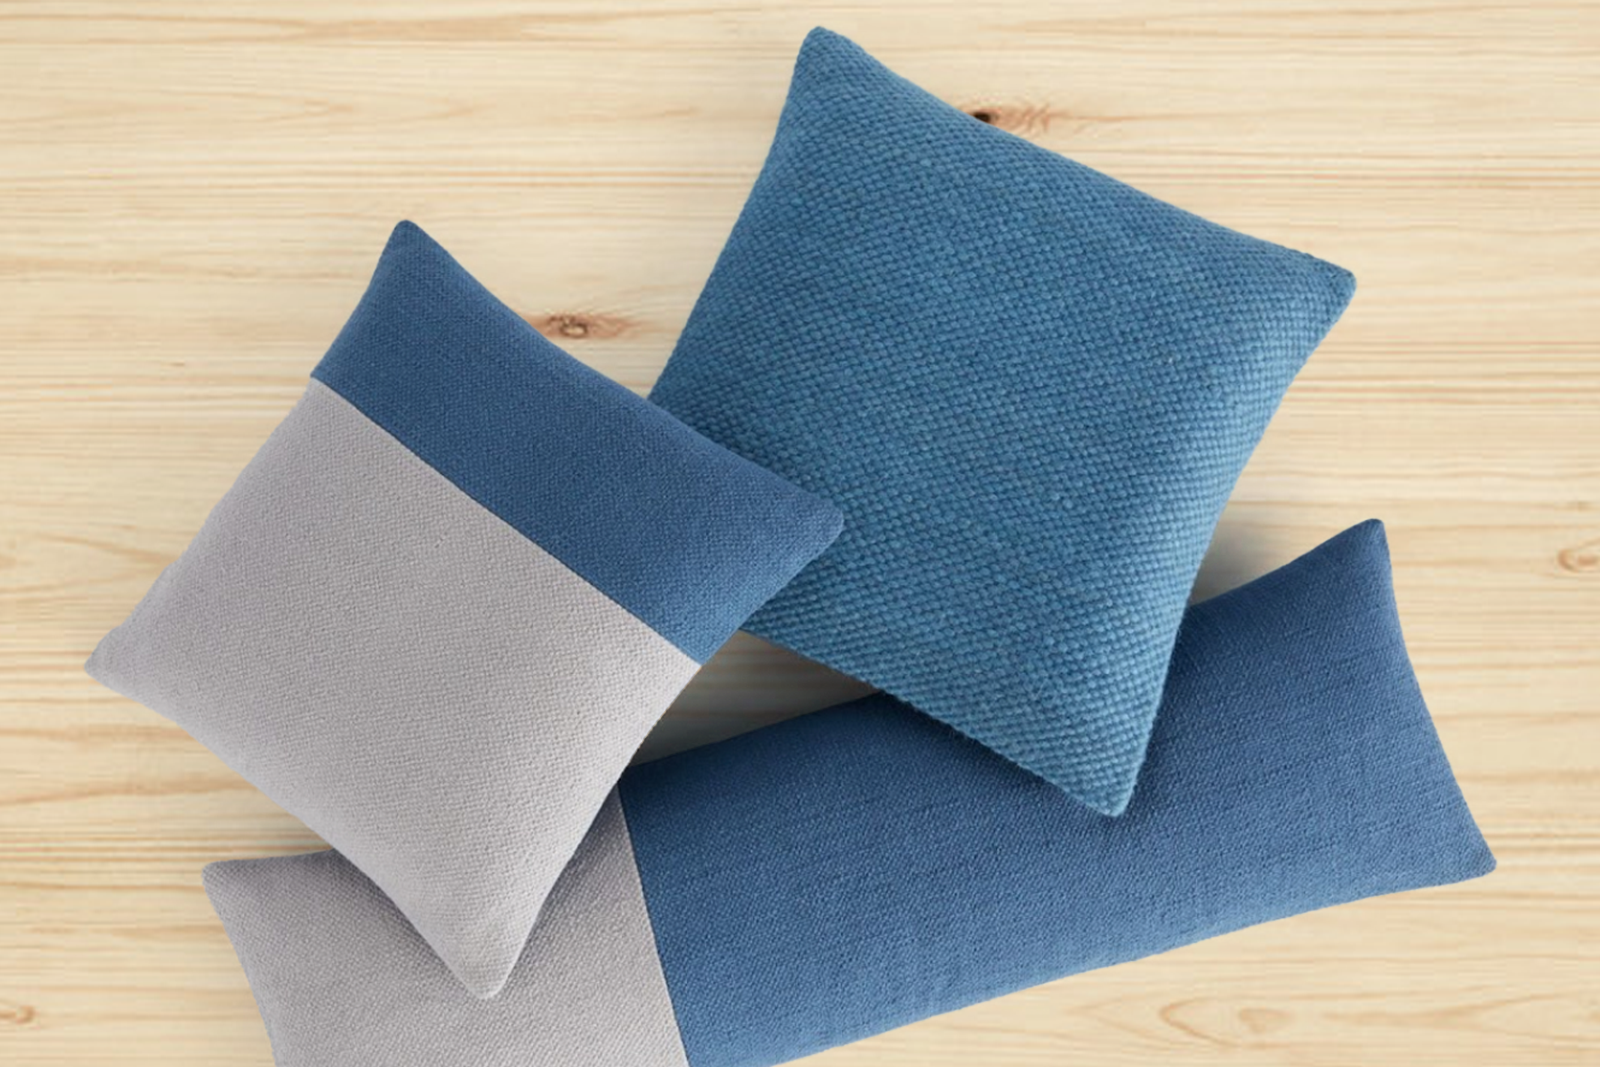 A group of blue and grey throw pillows on a wood table